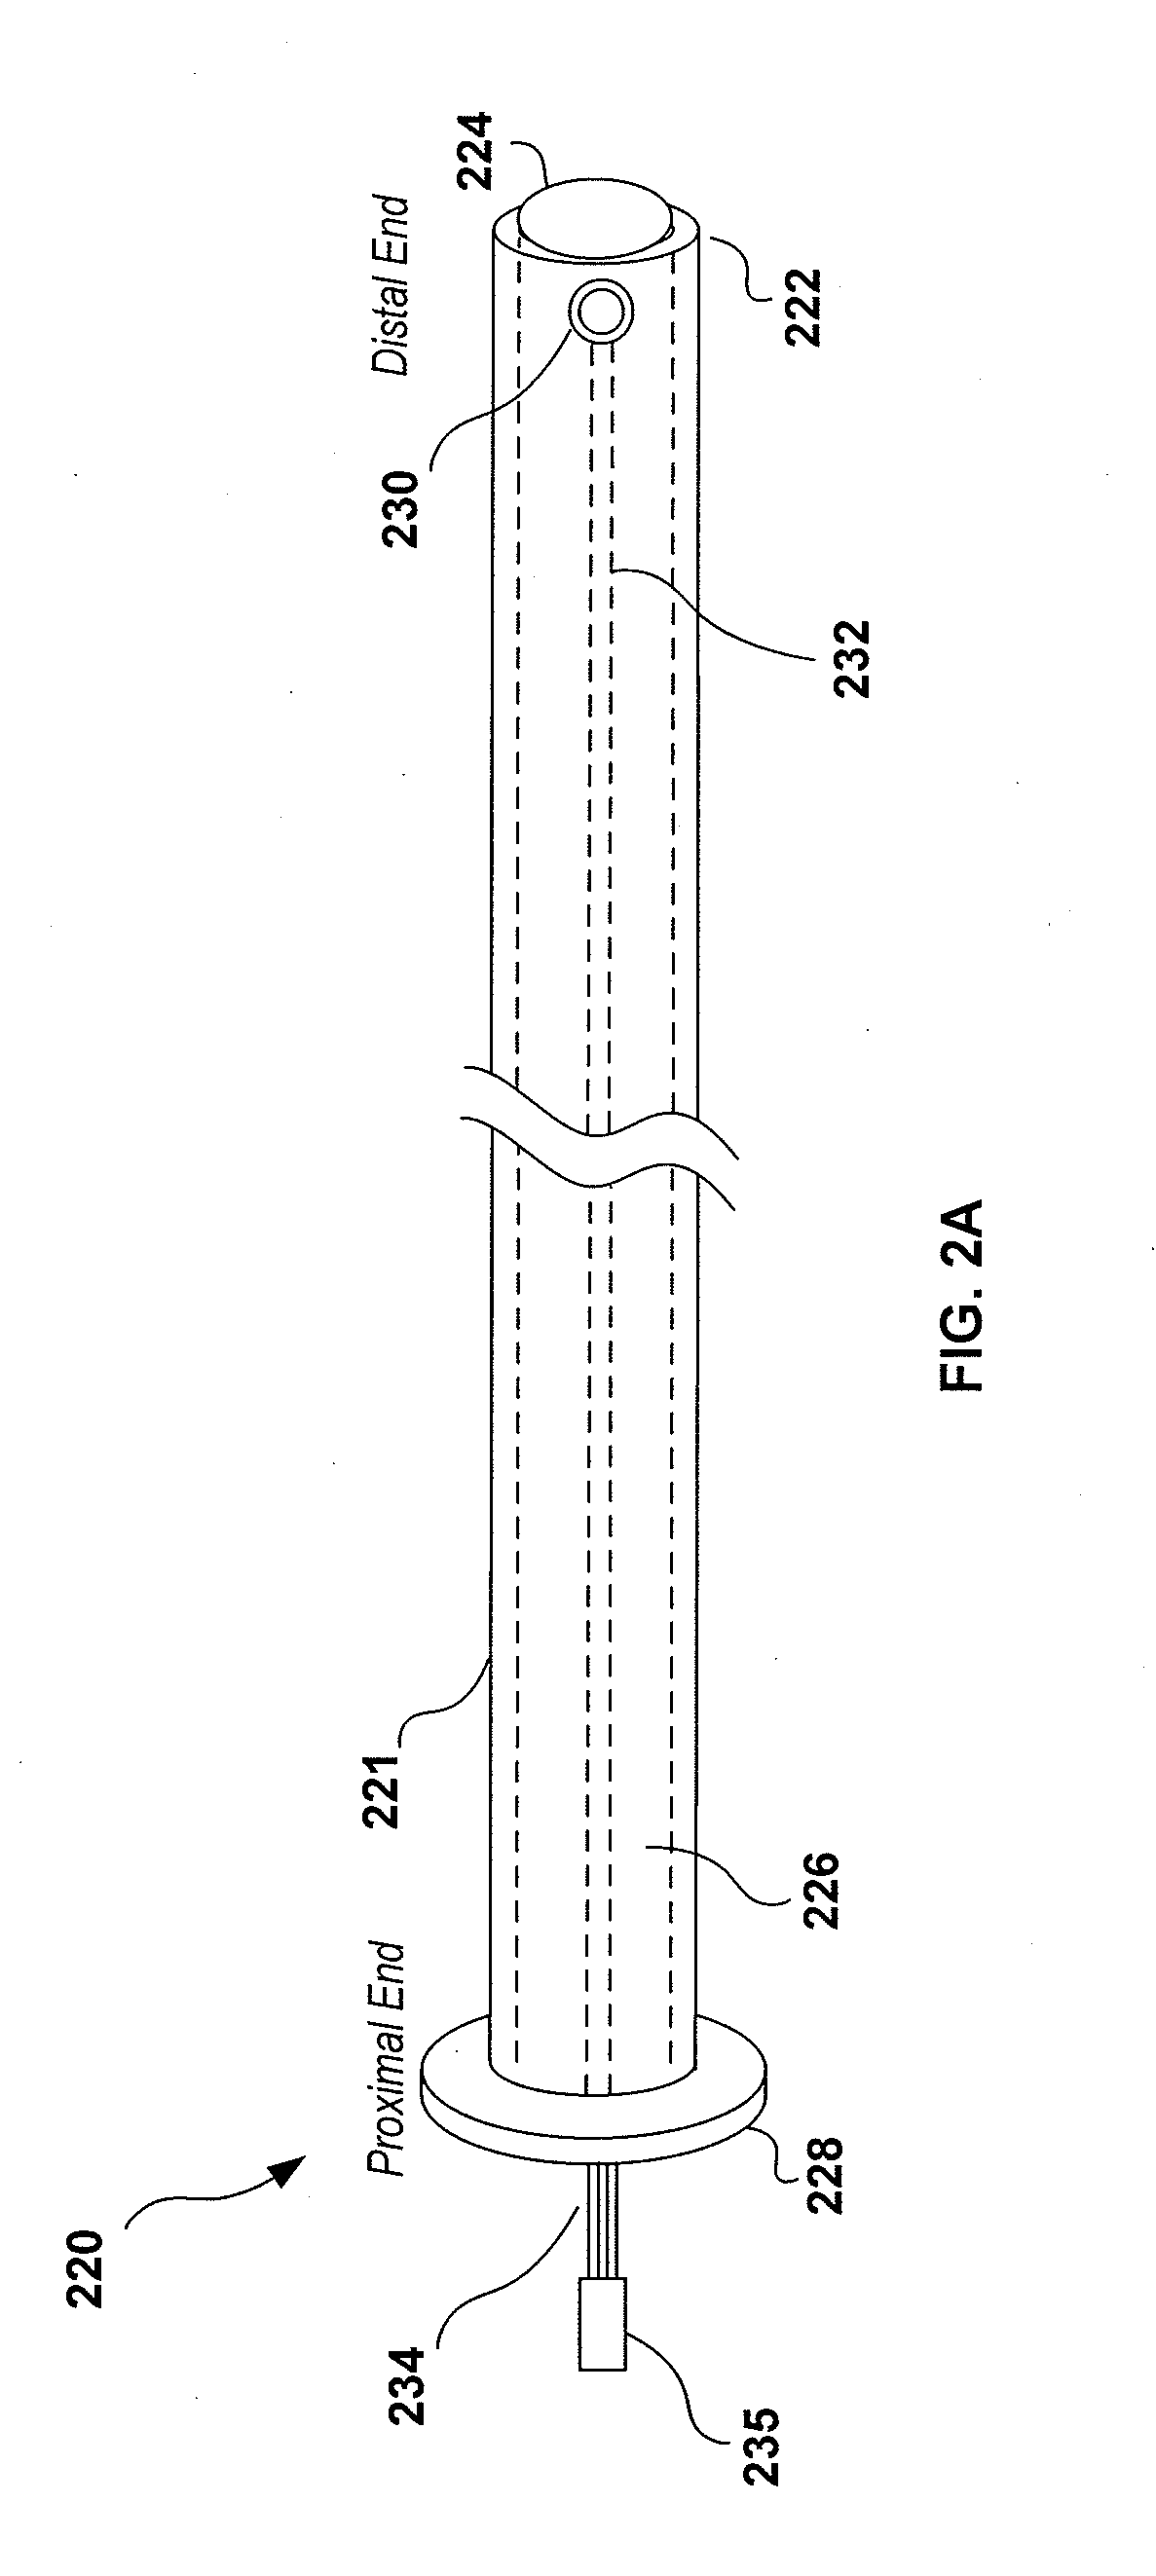 Intelligent endoscopy systems and methods